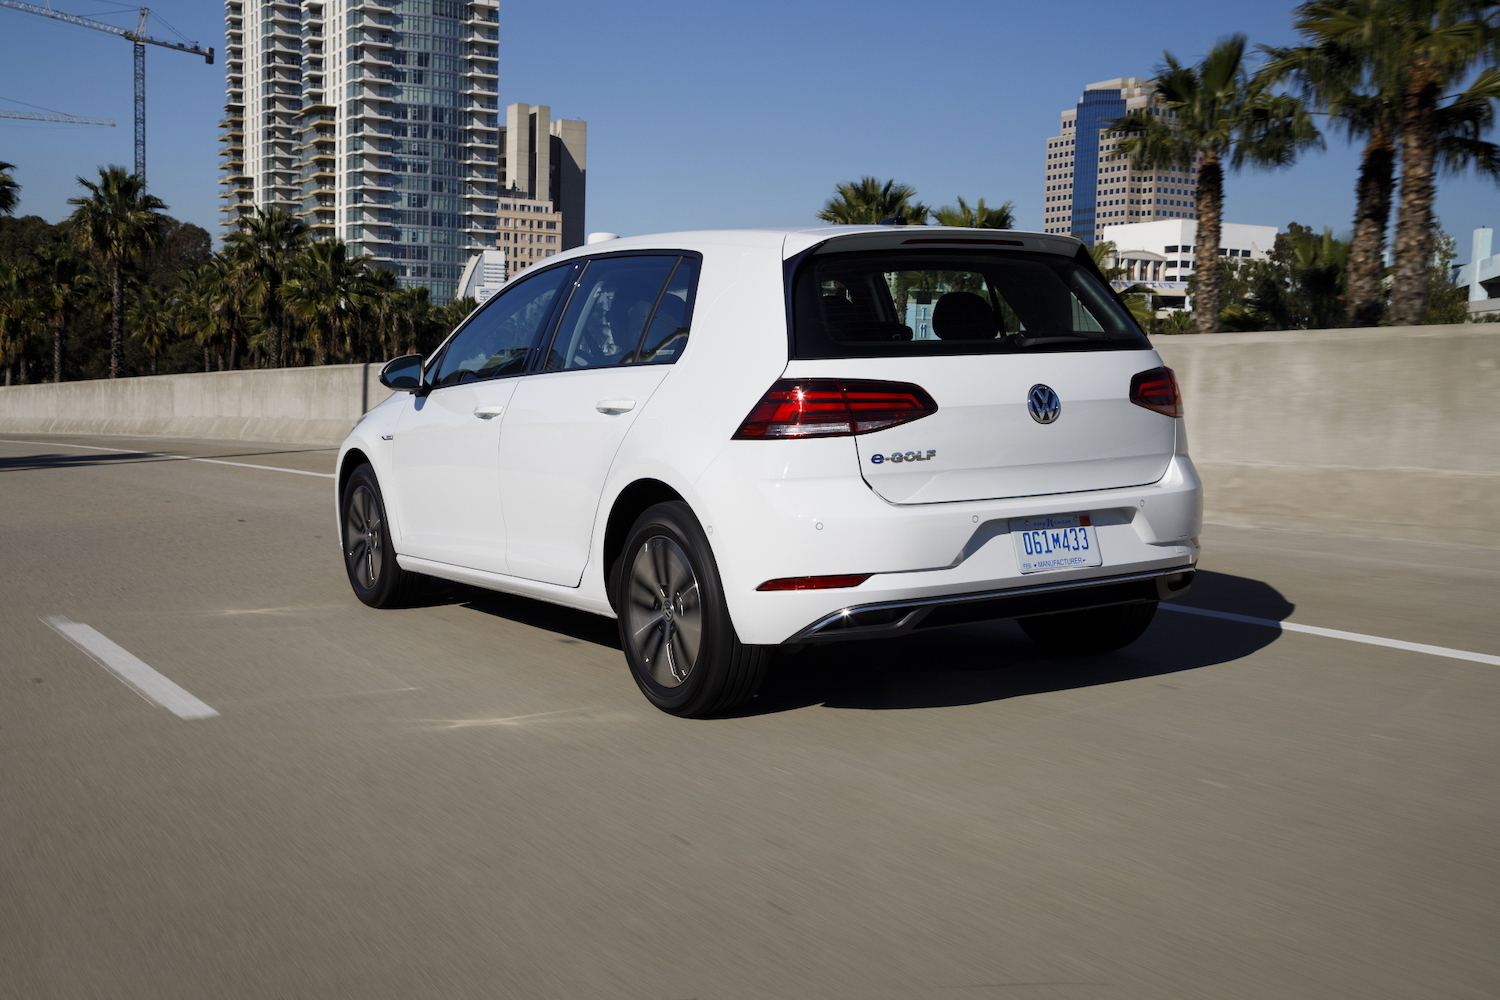 Rear end angle of 2017 Volkswagen e-Golf driving down the road in front of tall buildings.